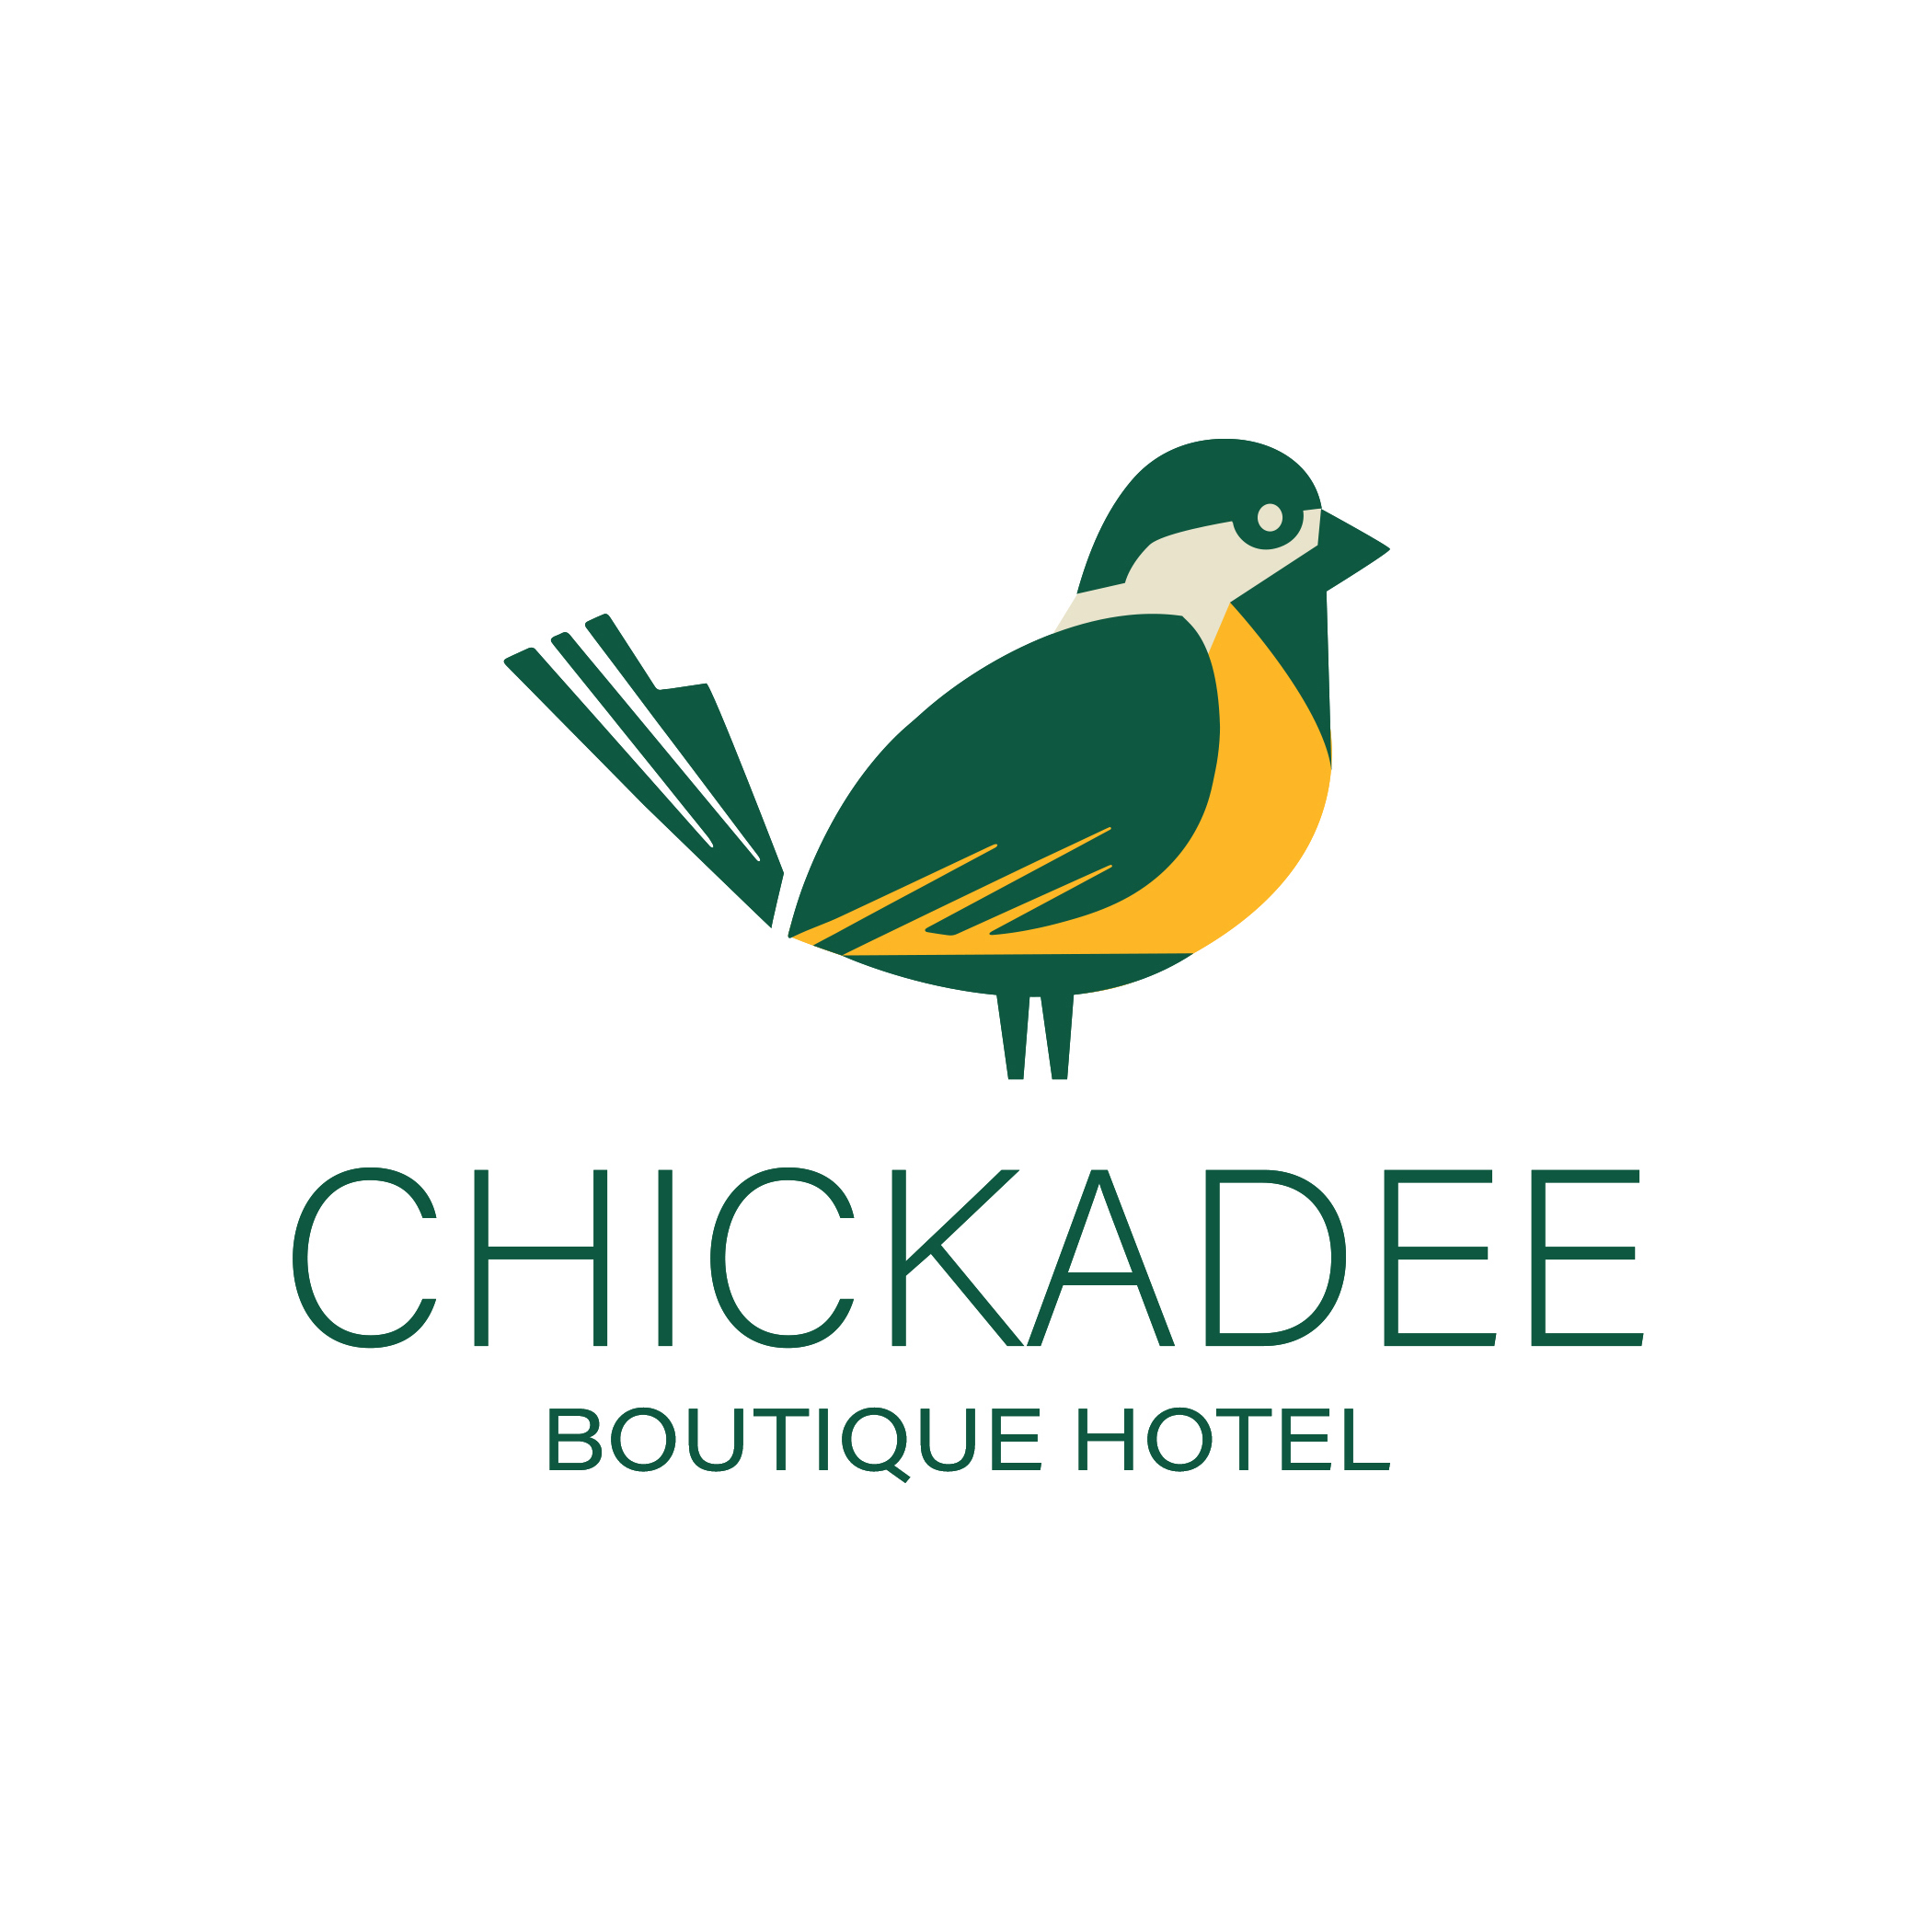 Chickadee Boutique Hotel 01 logo design by logo designer DLR Group  for your inspiration and for the worlds largest logo competition